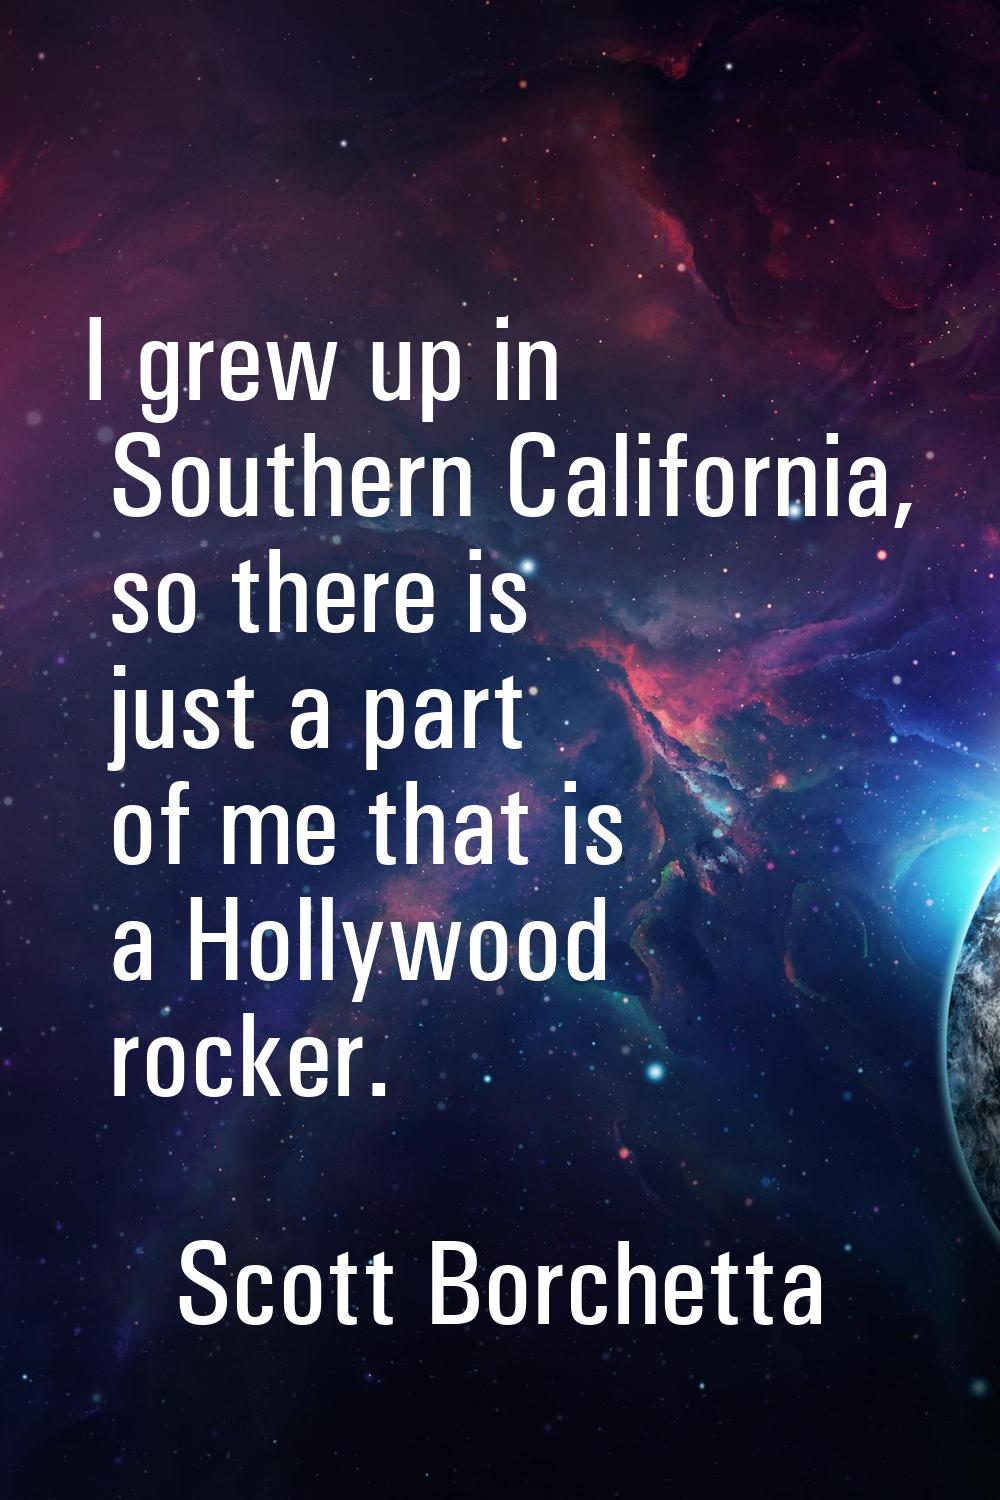 I grew up in Southern California, so there is just a part of me that is a Hollywood rocker.